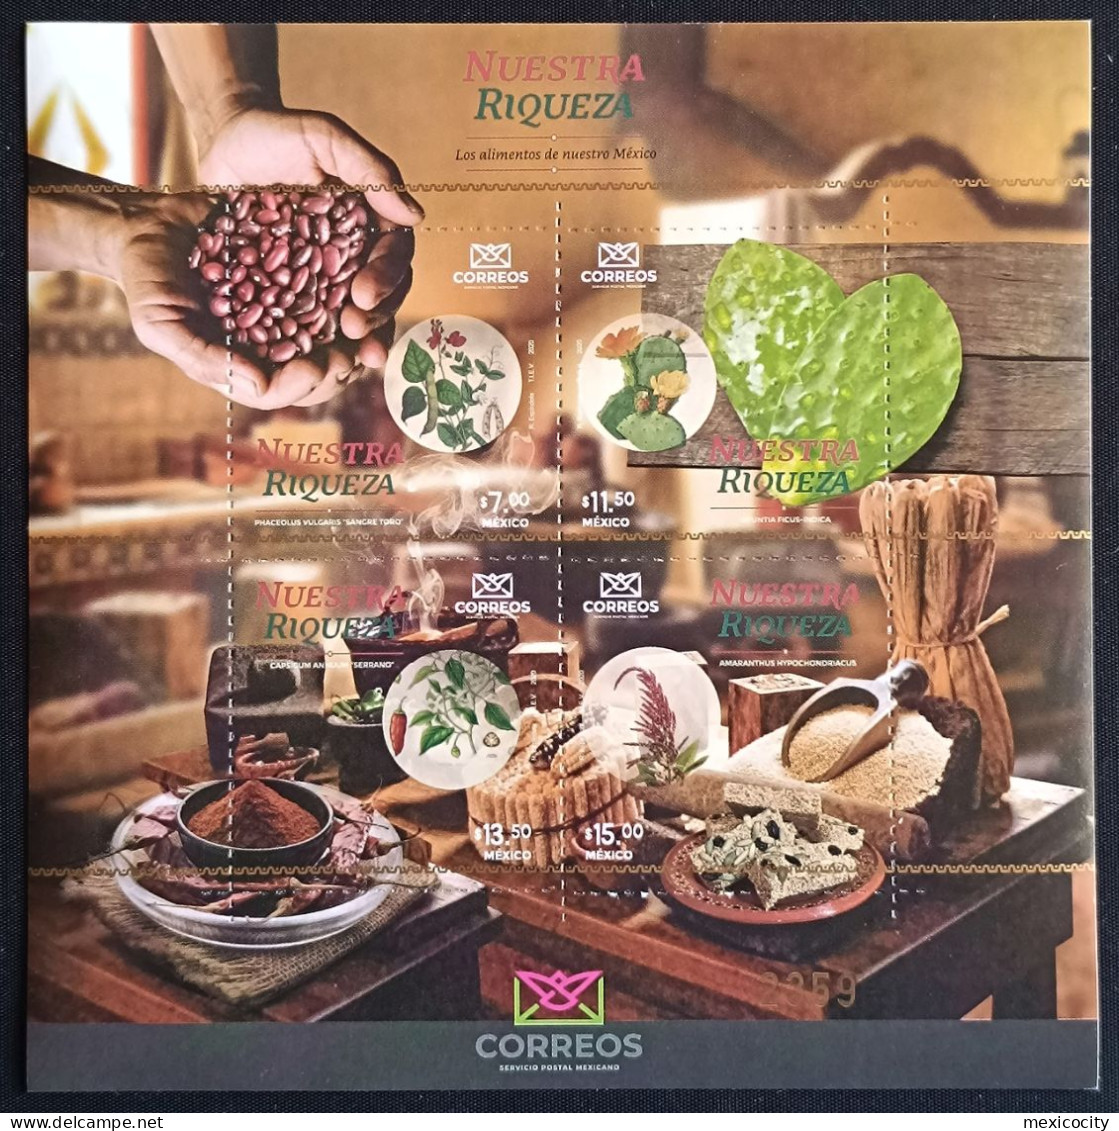 MEXICO 2020 FOODS Issue Nopal Cactii, Beans, Pepper, Amaranth LTD. ED. BLOC COLLECTOR, Mint NH Scarce - Mexico